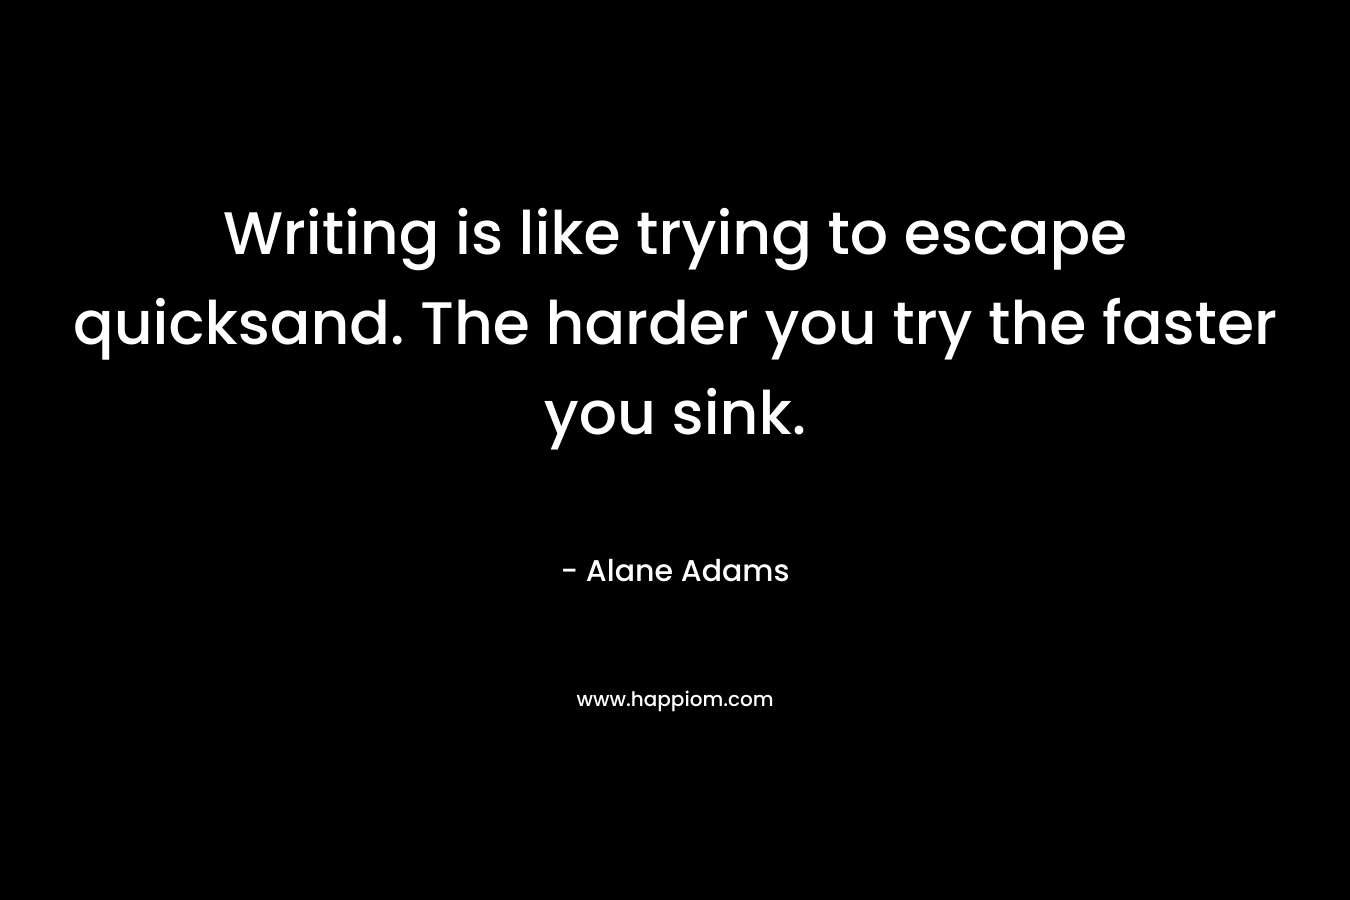 Writing is like trying to escape quicksand. The harder you try the faster you sink.